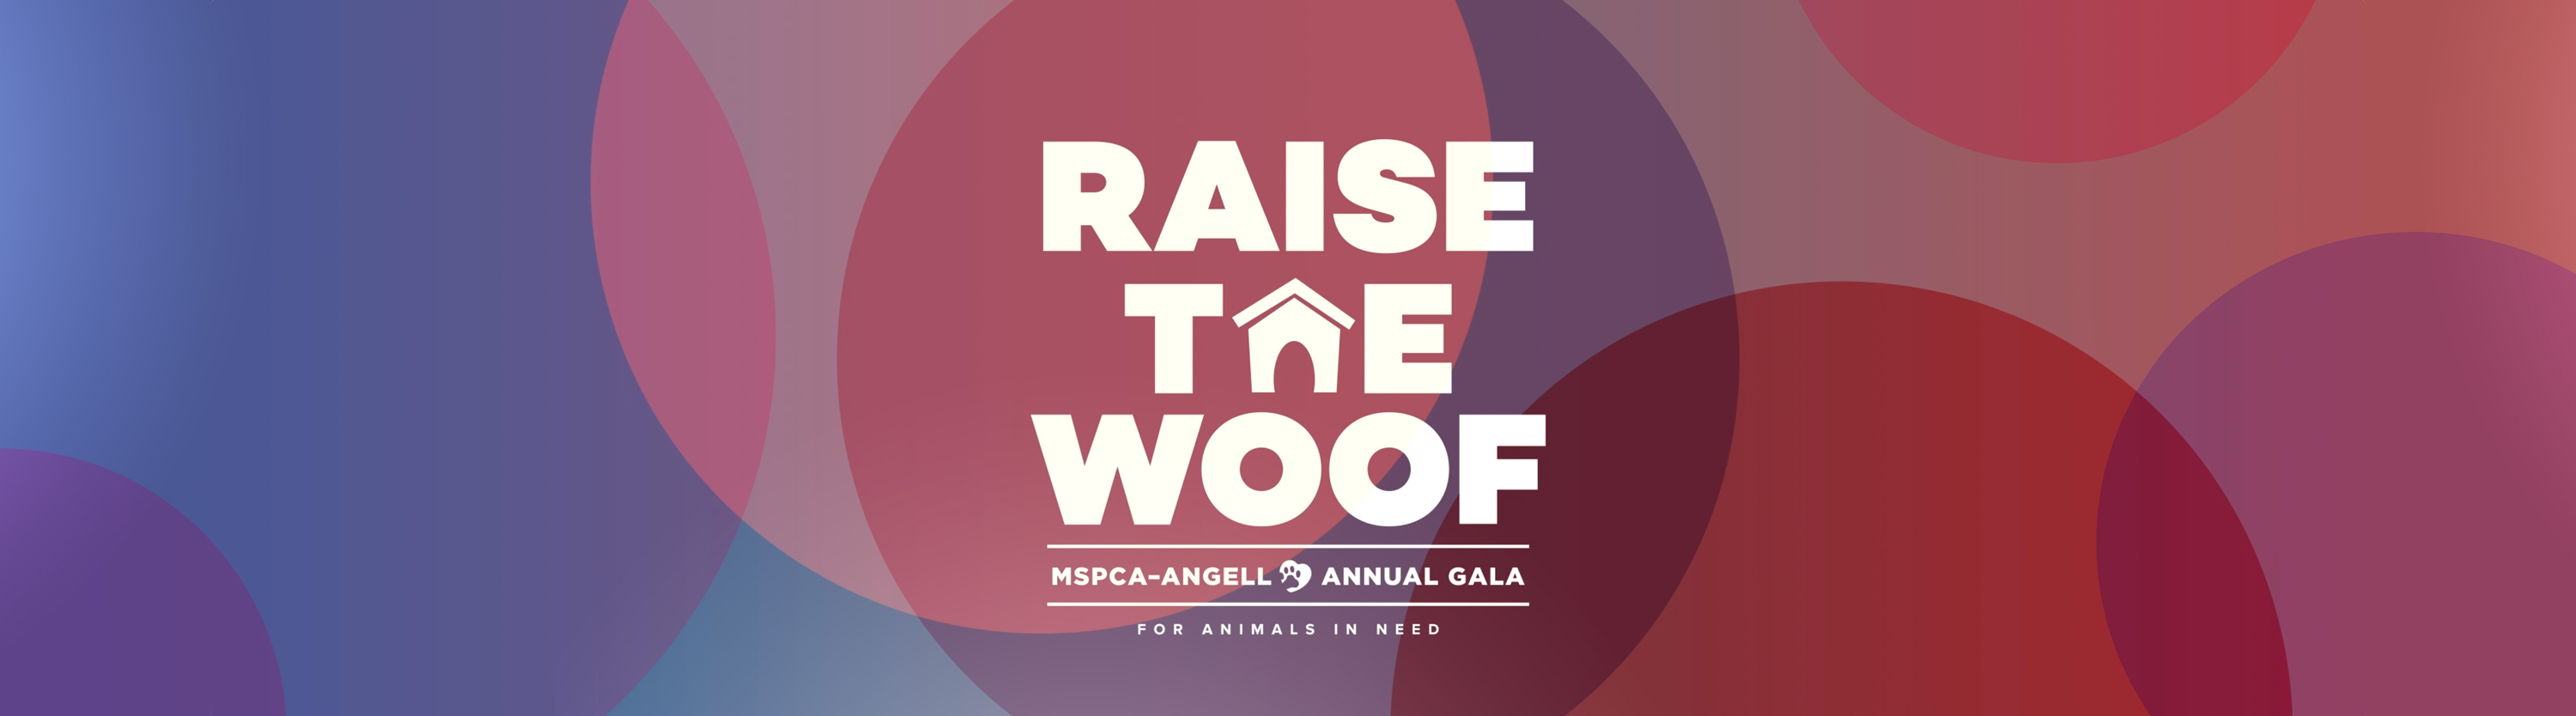 Raise the Woof logo on colorful bokeh background